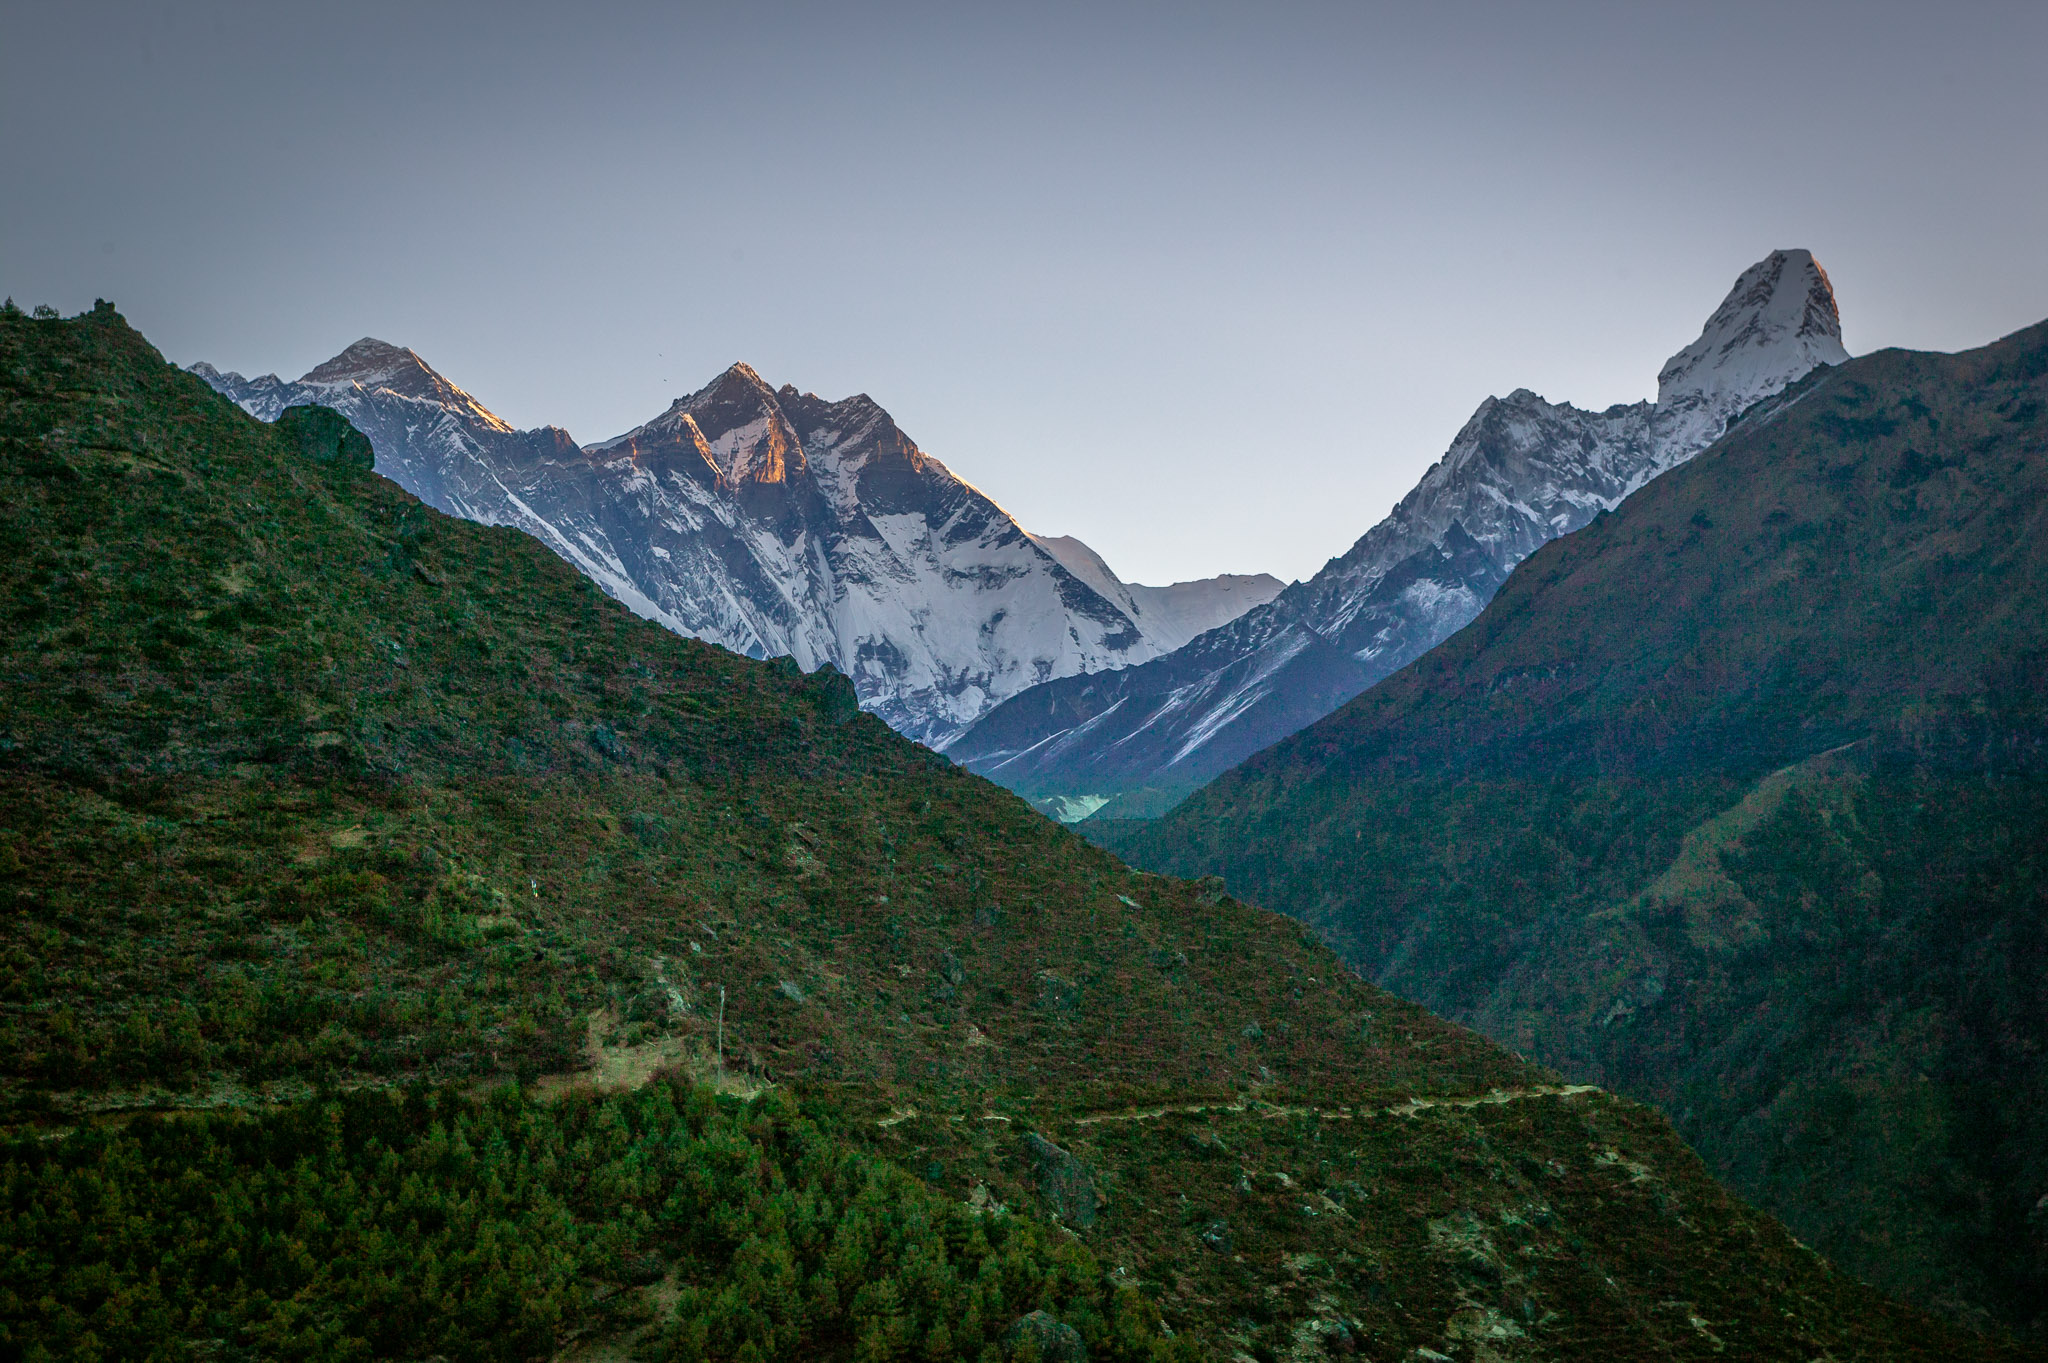 First light in Namche (Everest on left, Ama Dablam on right)